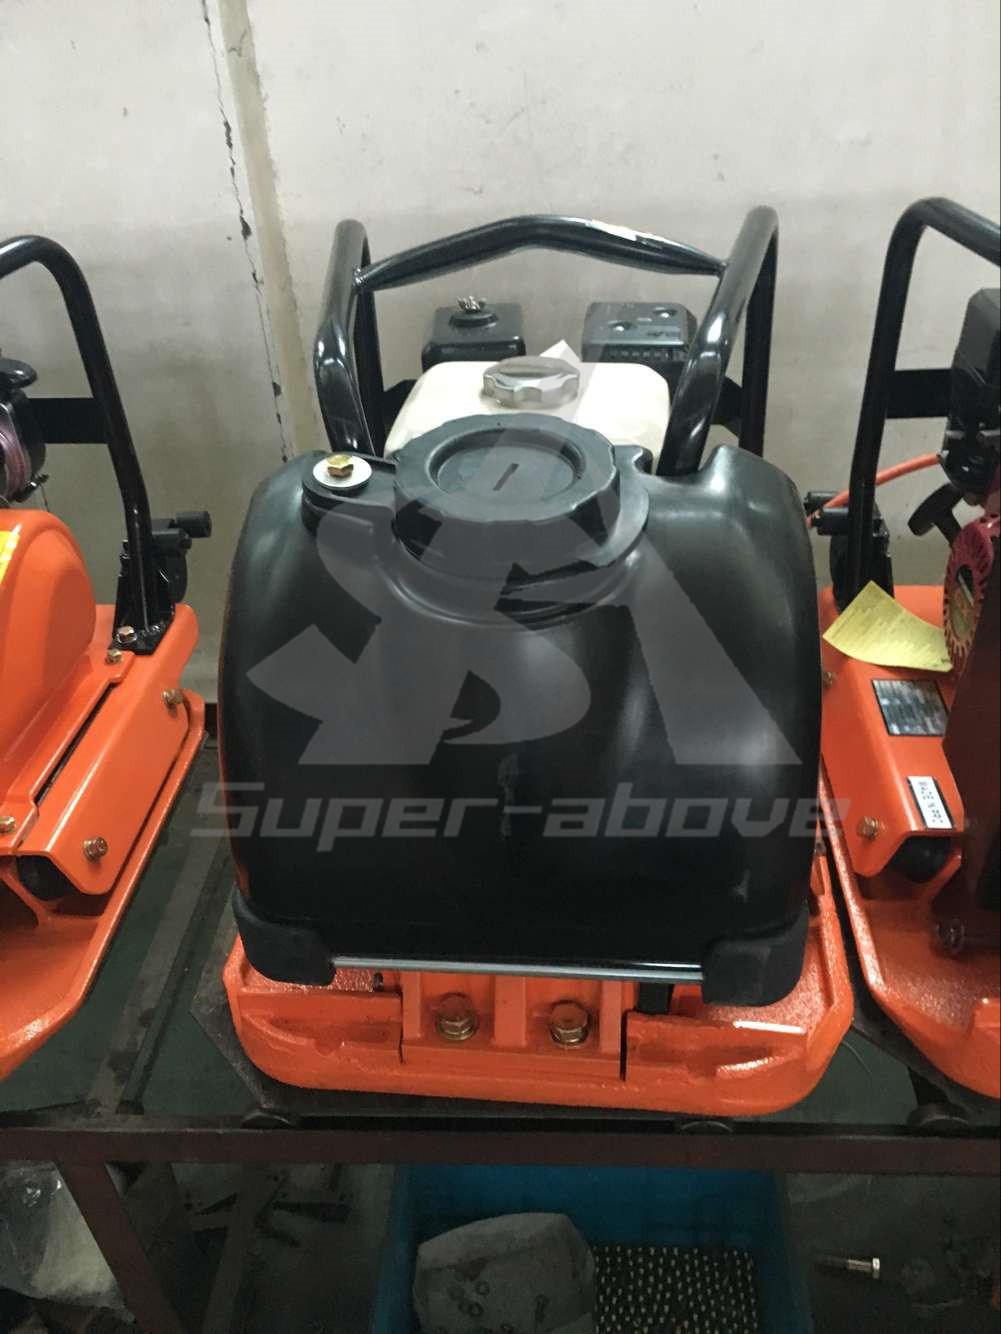 Good Quality! ! ! Gasoline Engine/Diesel Engine Plate Compactor, Guangzhou Supplier